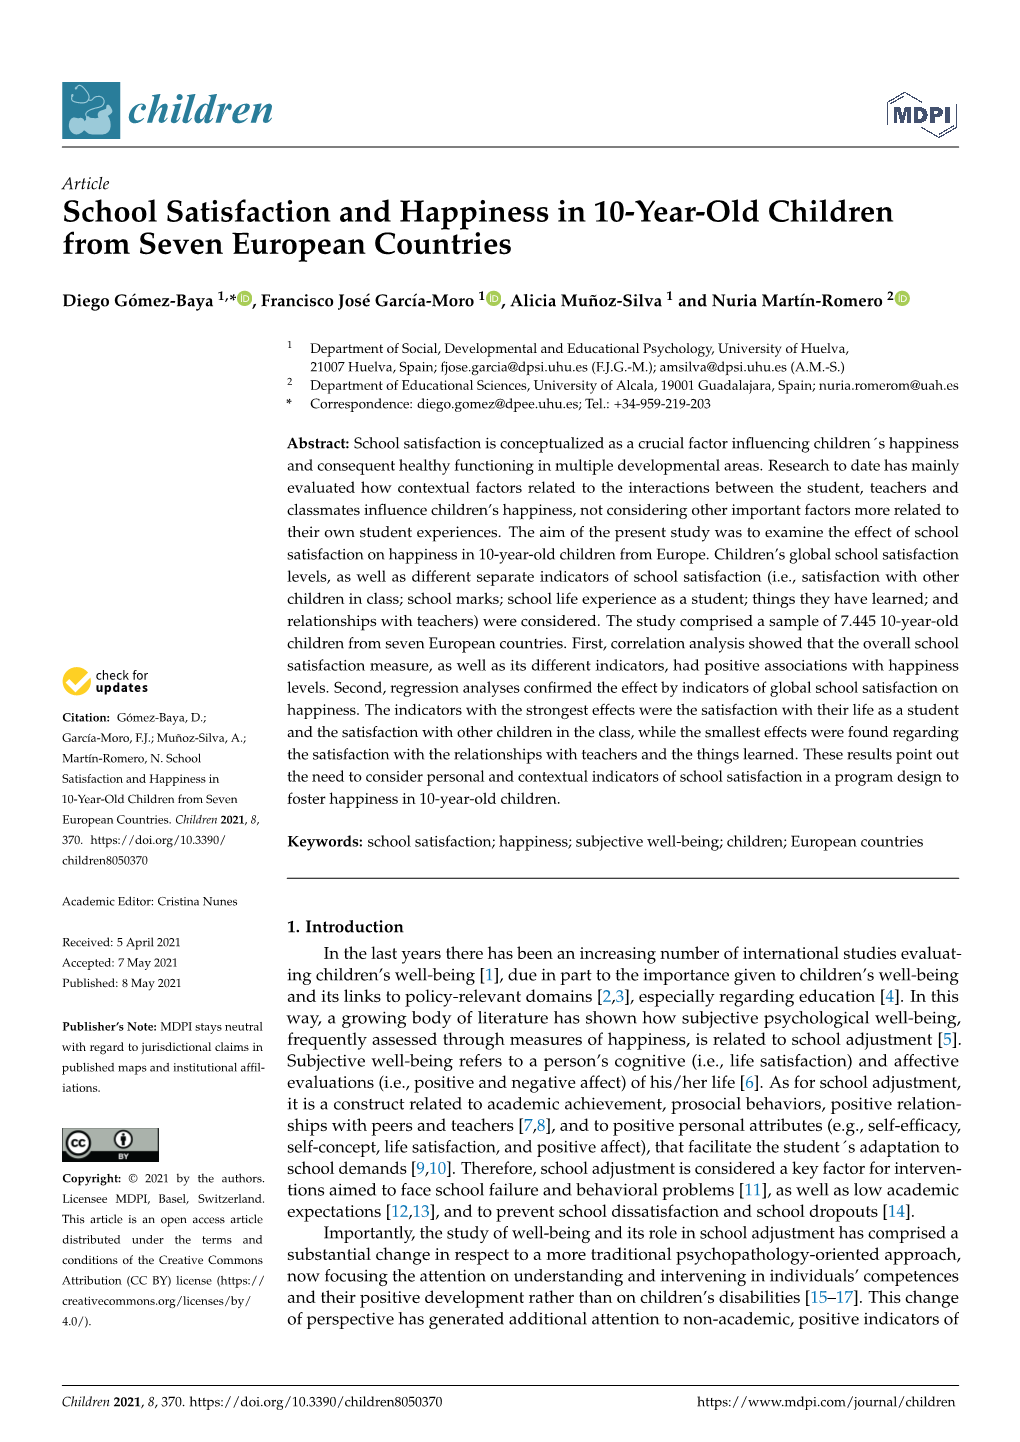 School Satisfaction and Happiness in 10-Year-Old Children from Seven European Countries